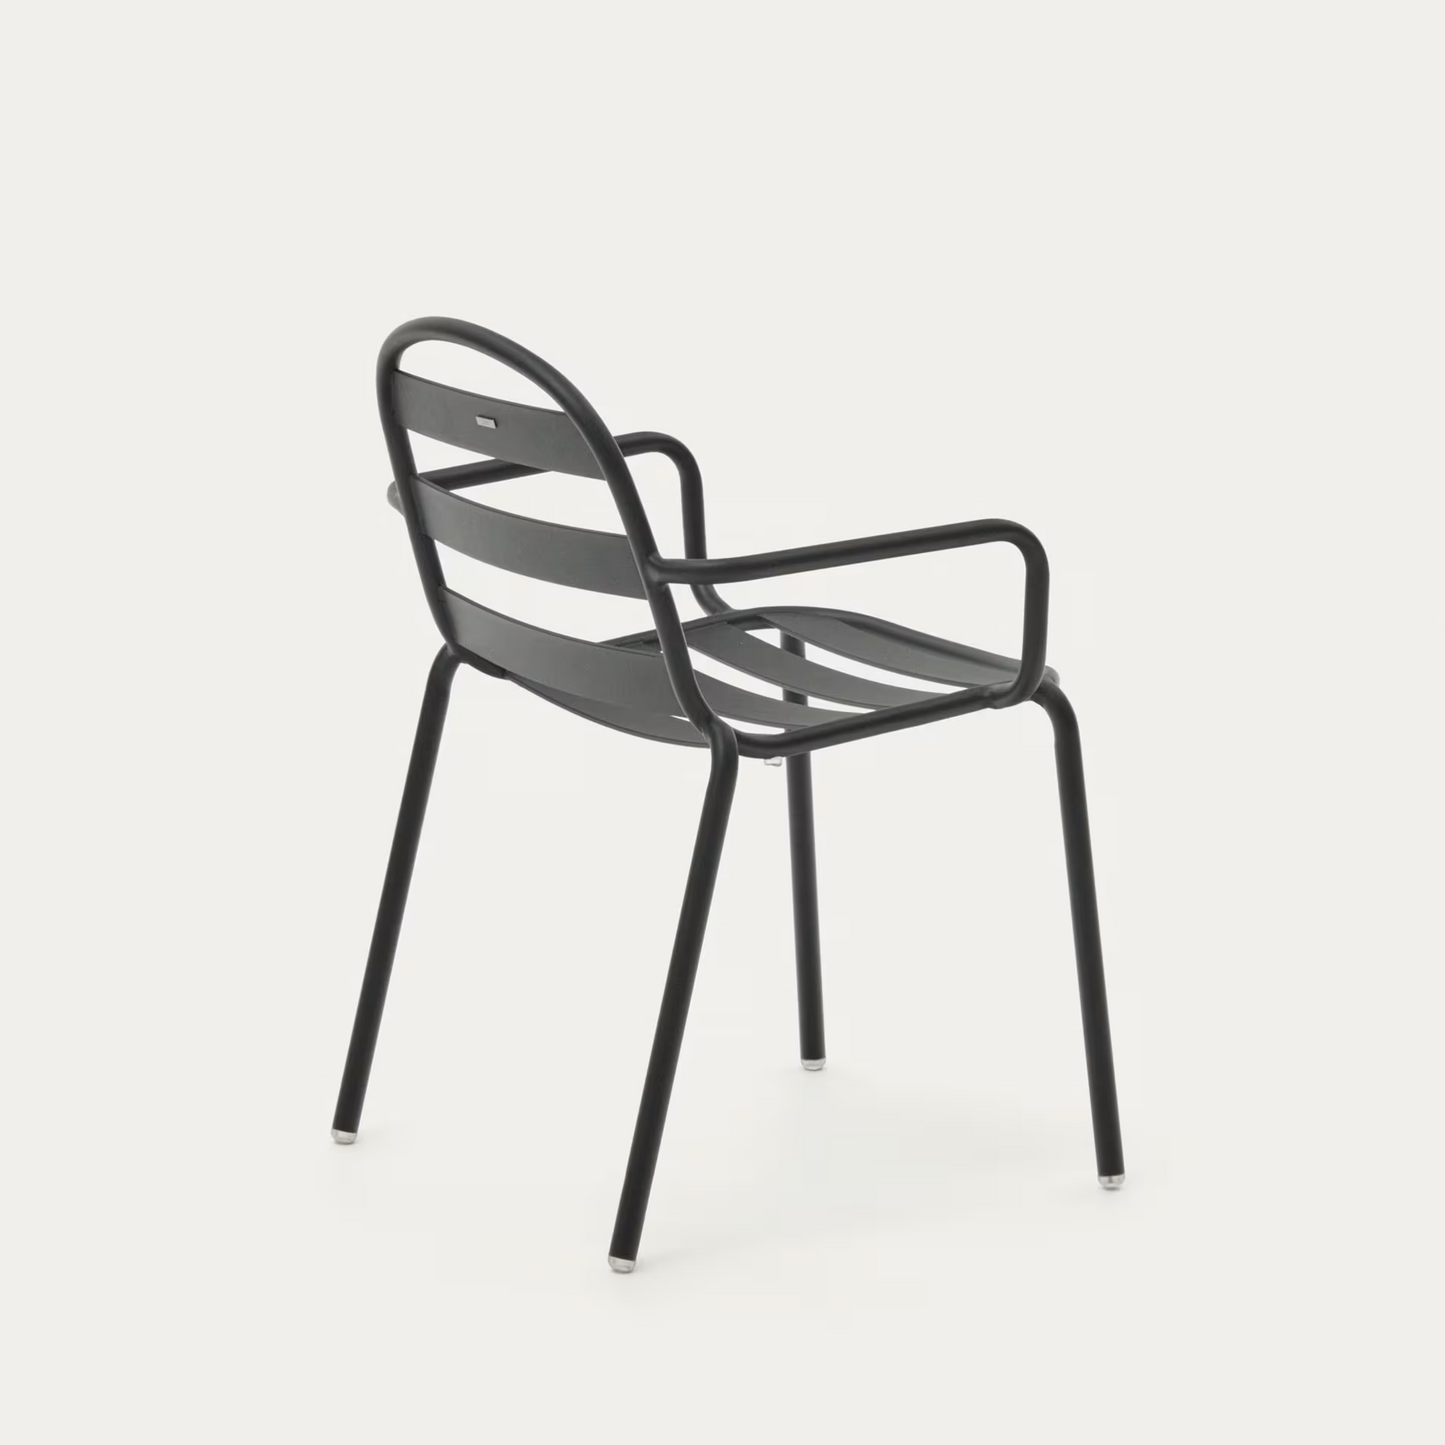 Joncols Outdoor Dining Chair - Grey